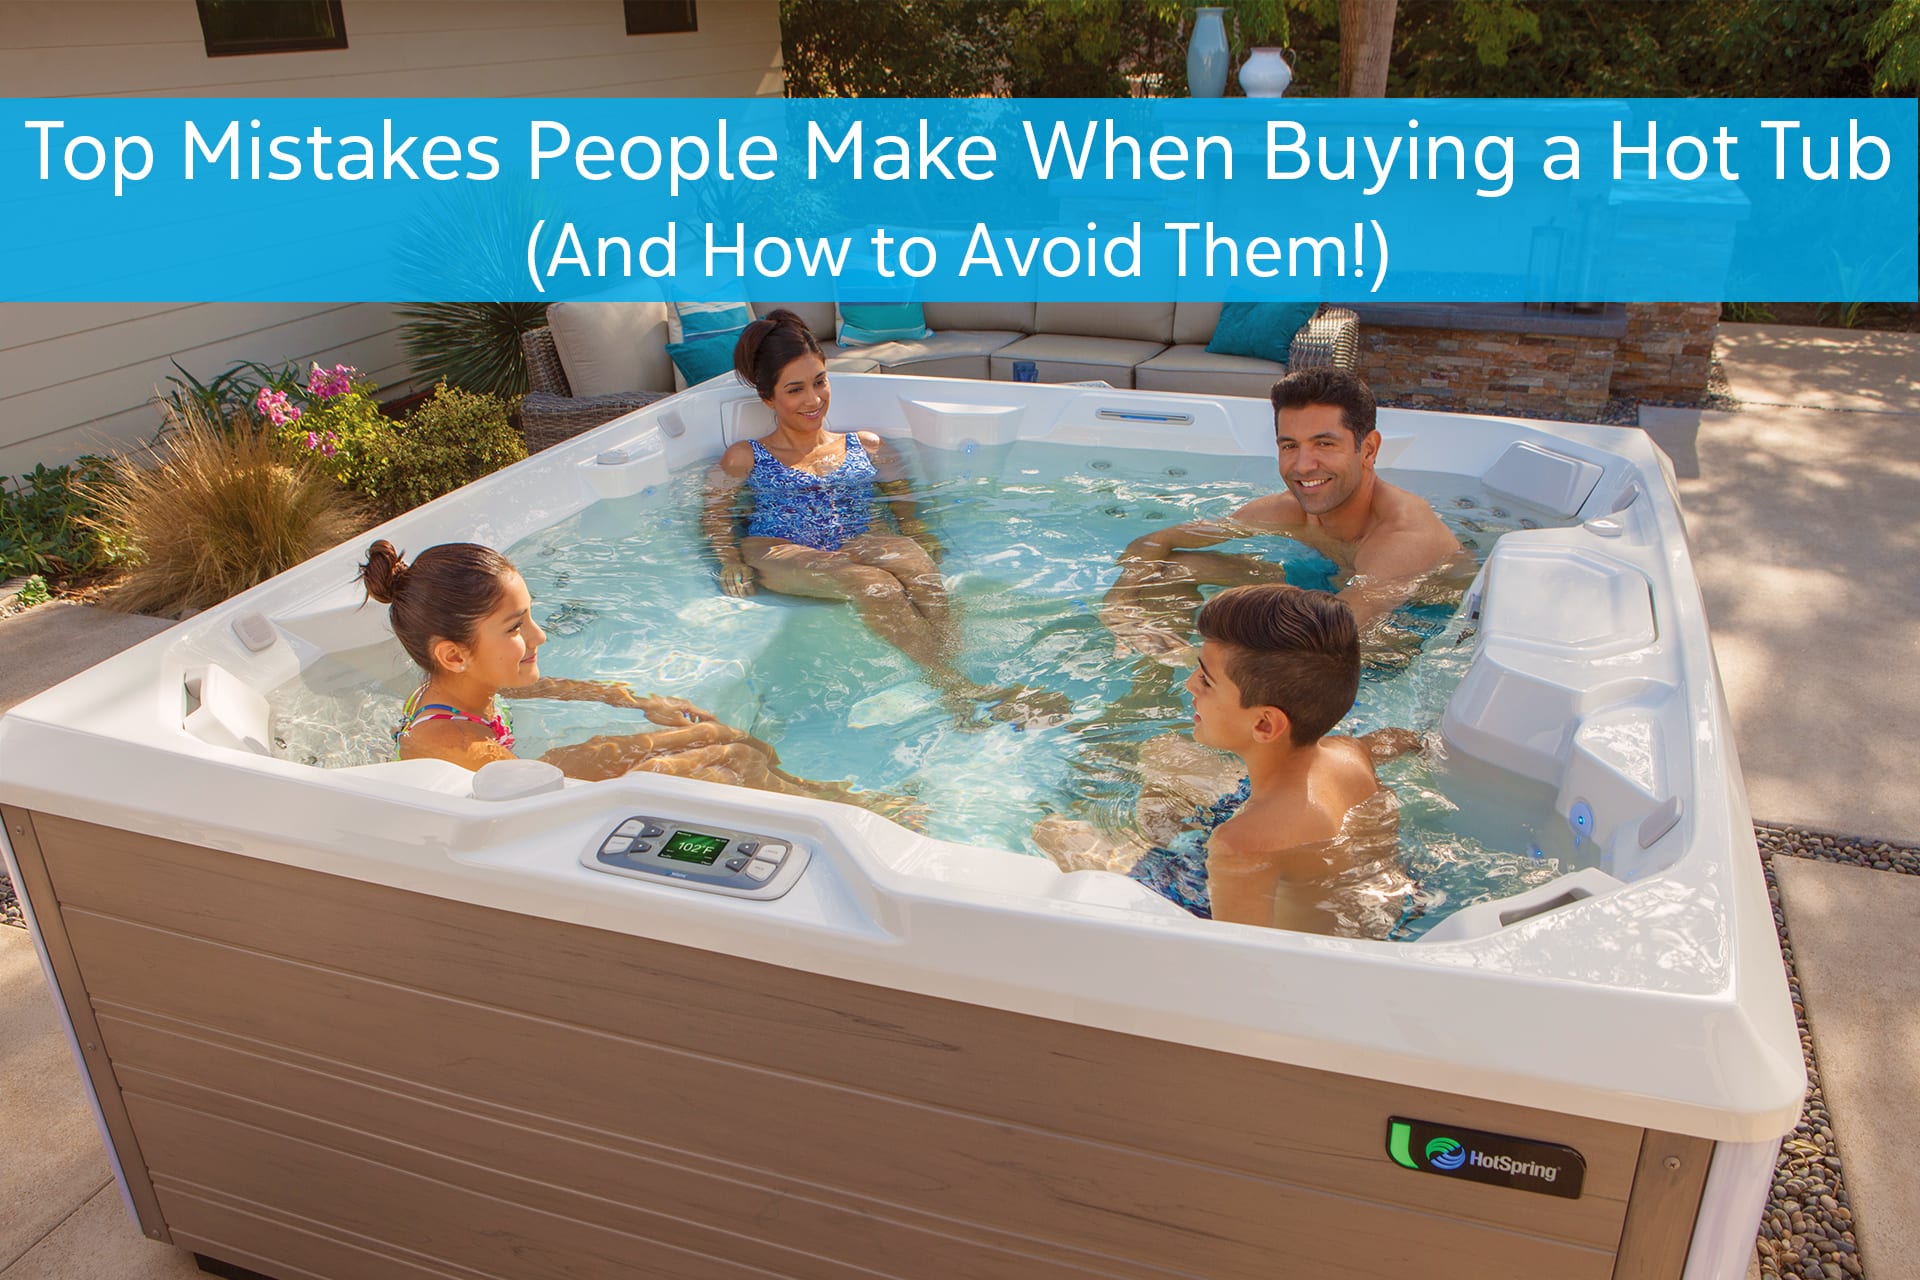 Top Mistakes People Make When Buying a Hot Tub and How to Avoid Them